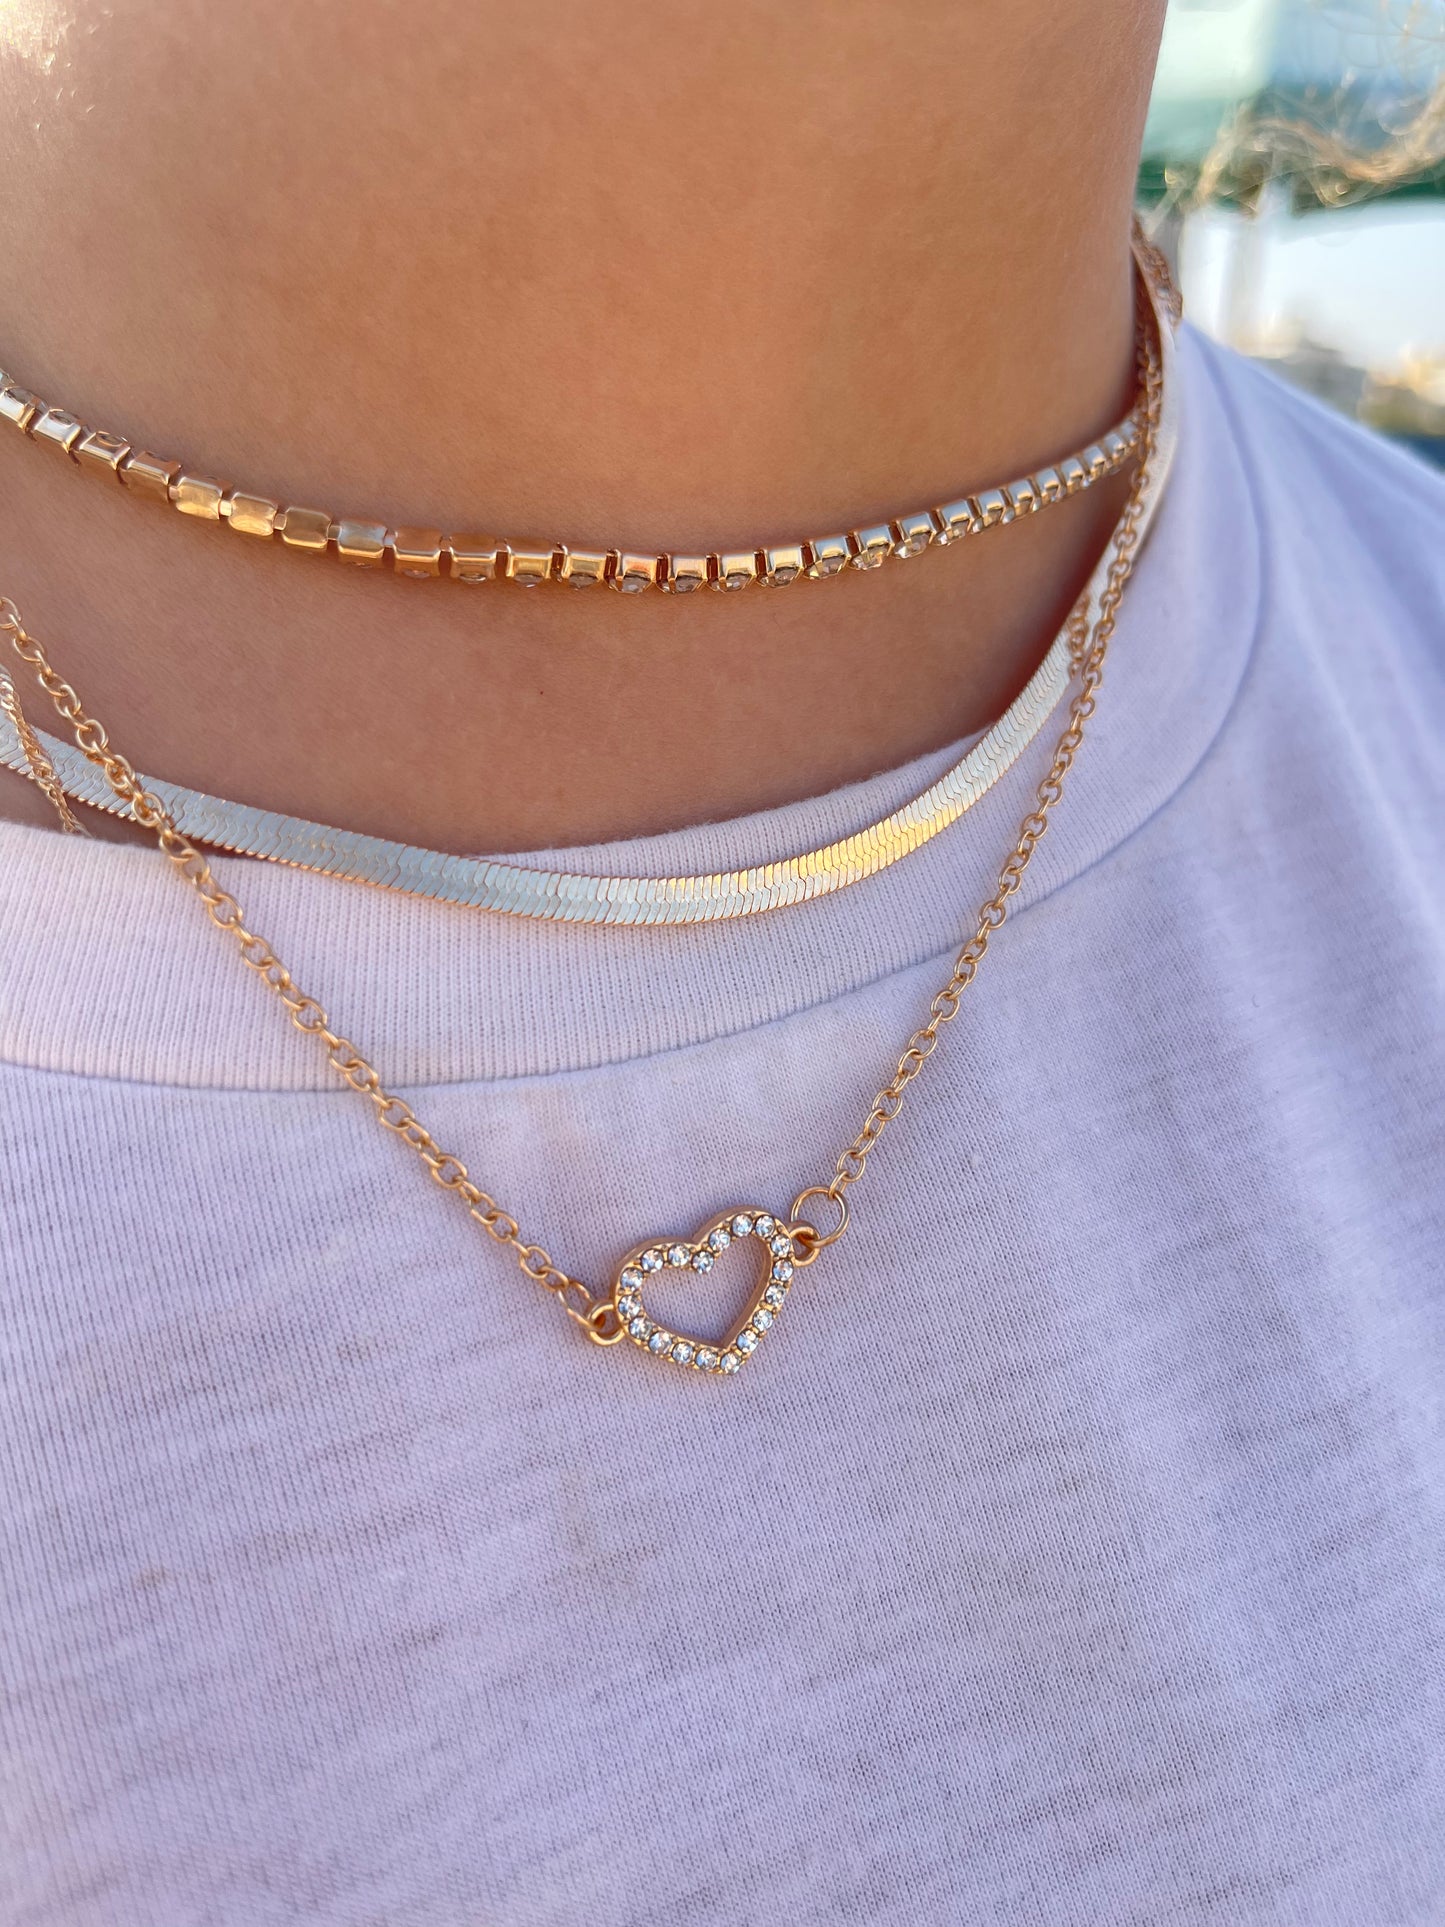 Hearts All Around Necklace 2.0